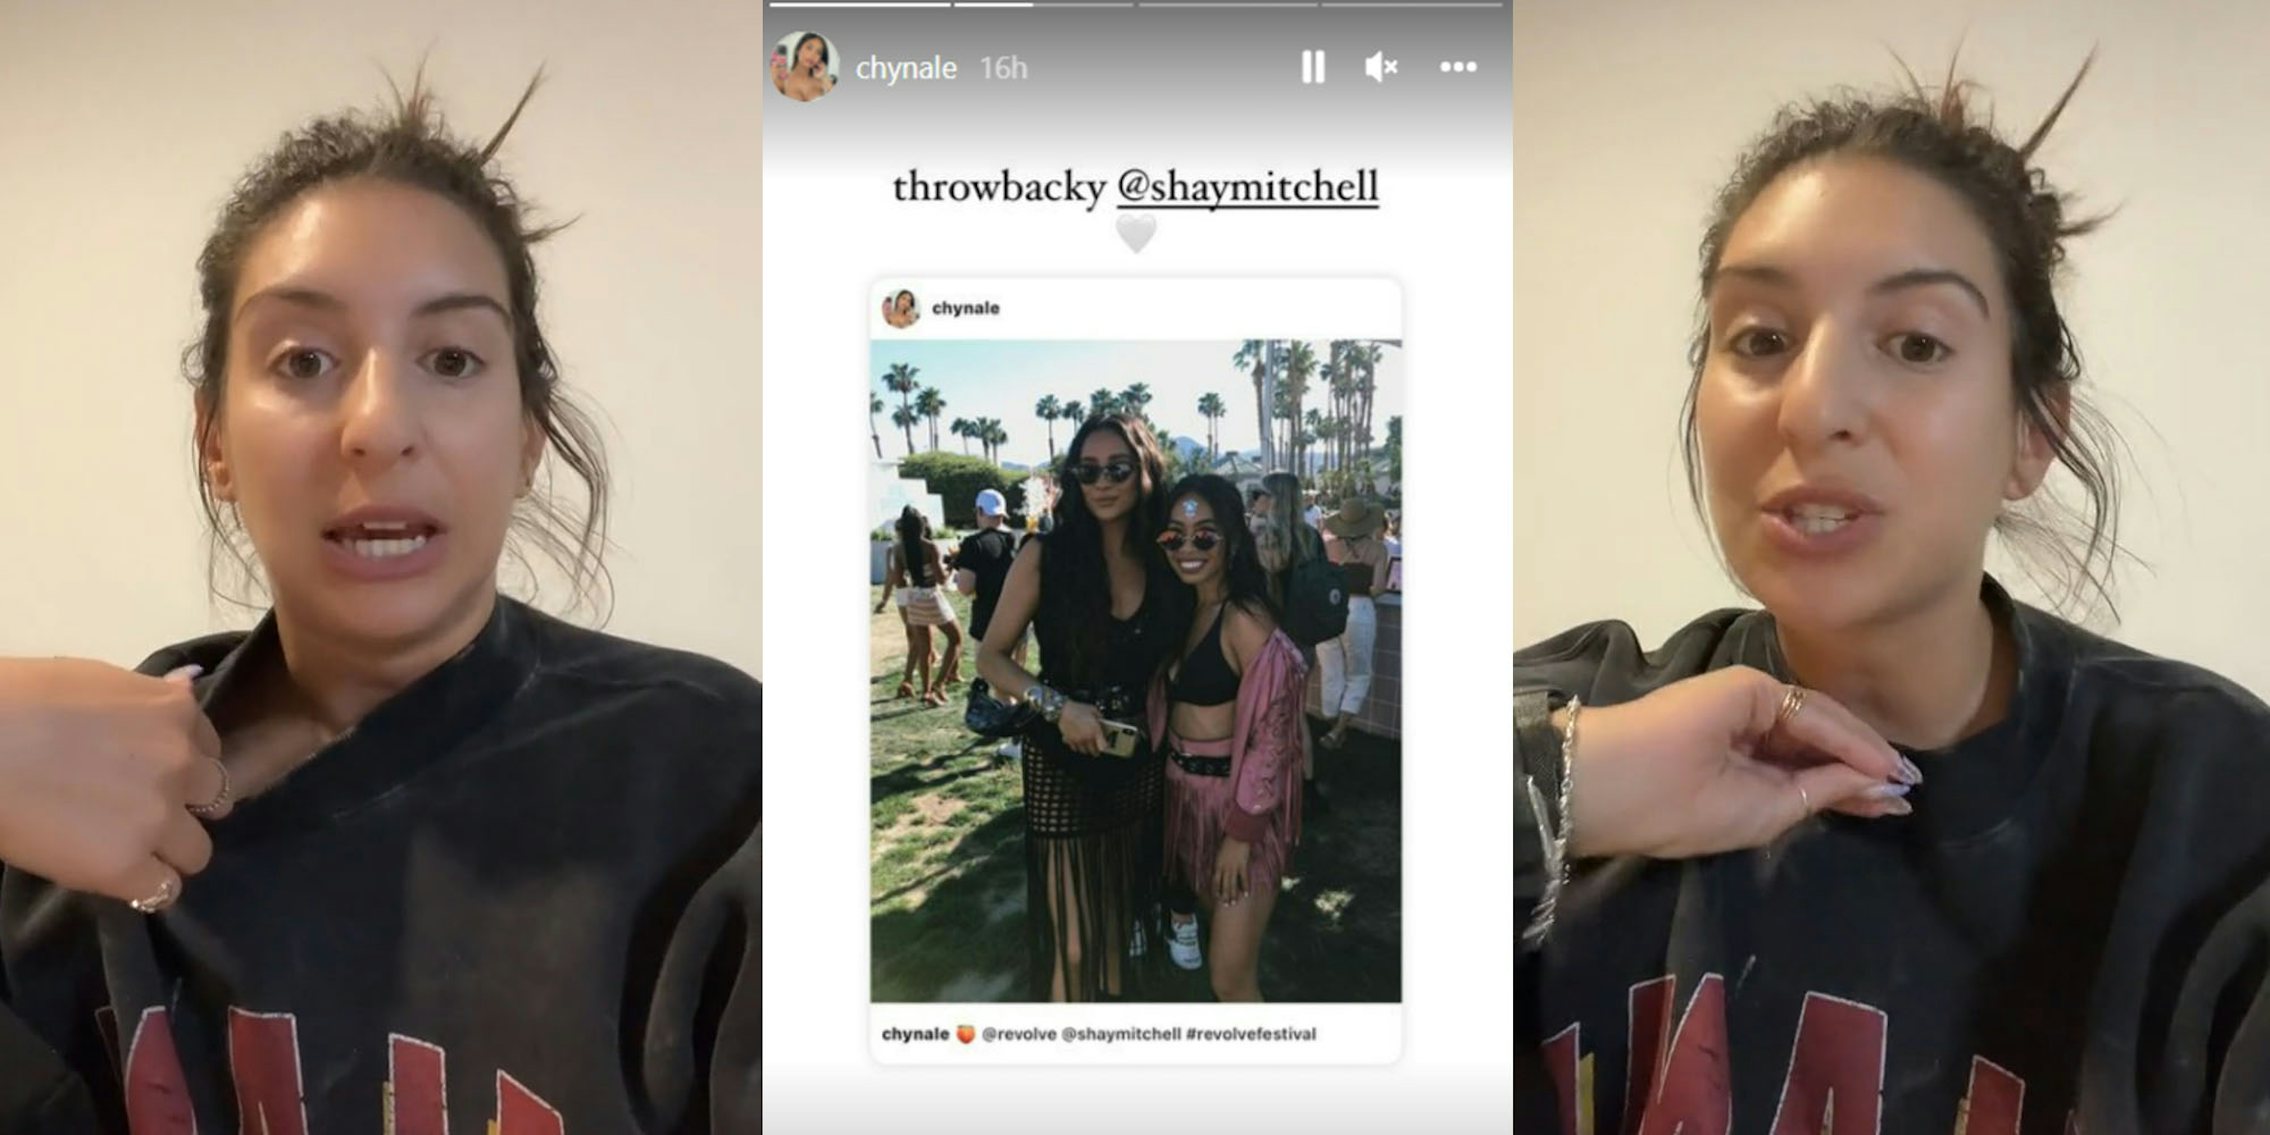 woman grabbing shirt talking (l) Revolve Music Festival pic of Shay Mitchell with woman on instagram story caption 'throwback @shaymitchell' (c) woman talking with hand mad (r)